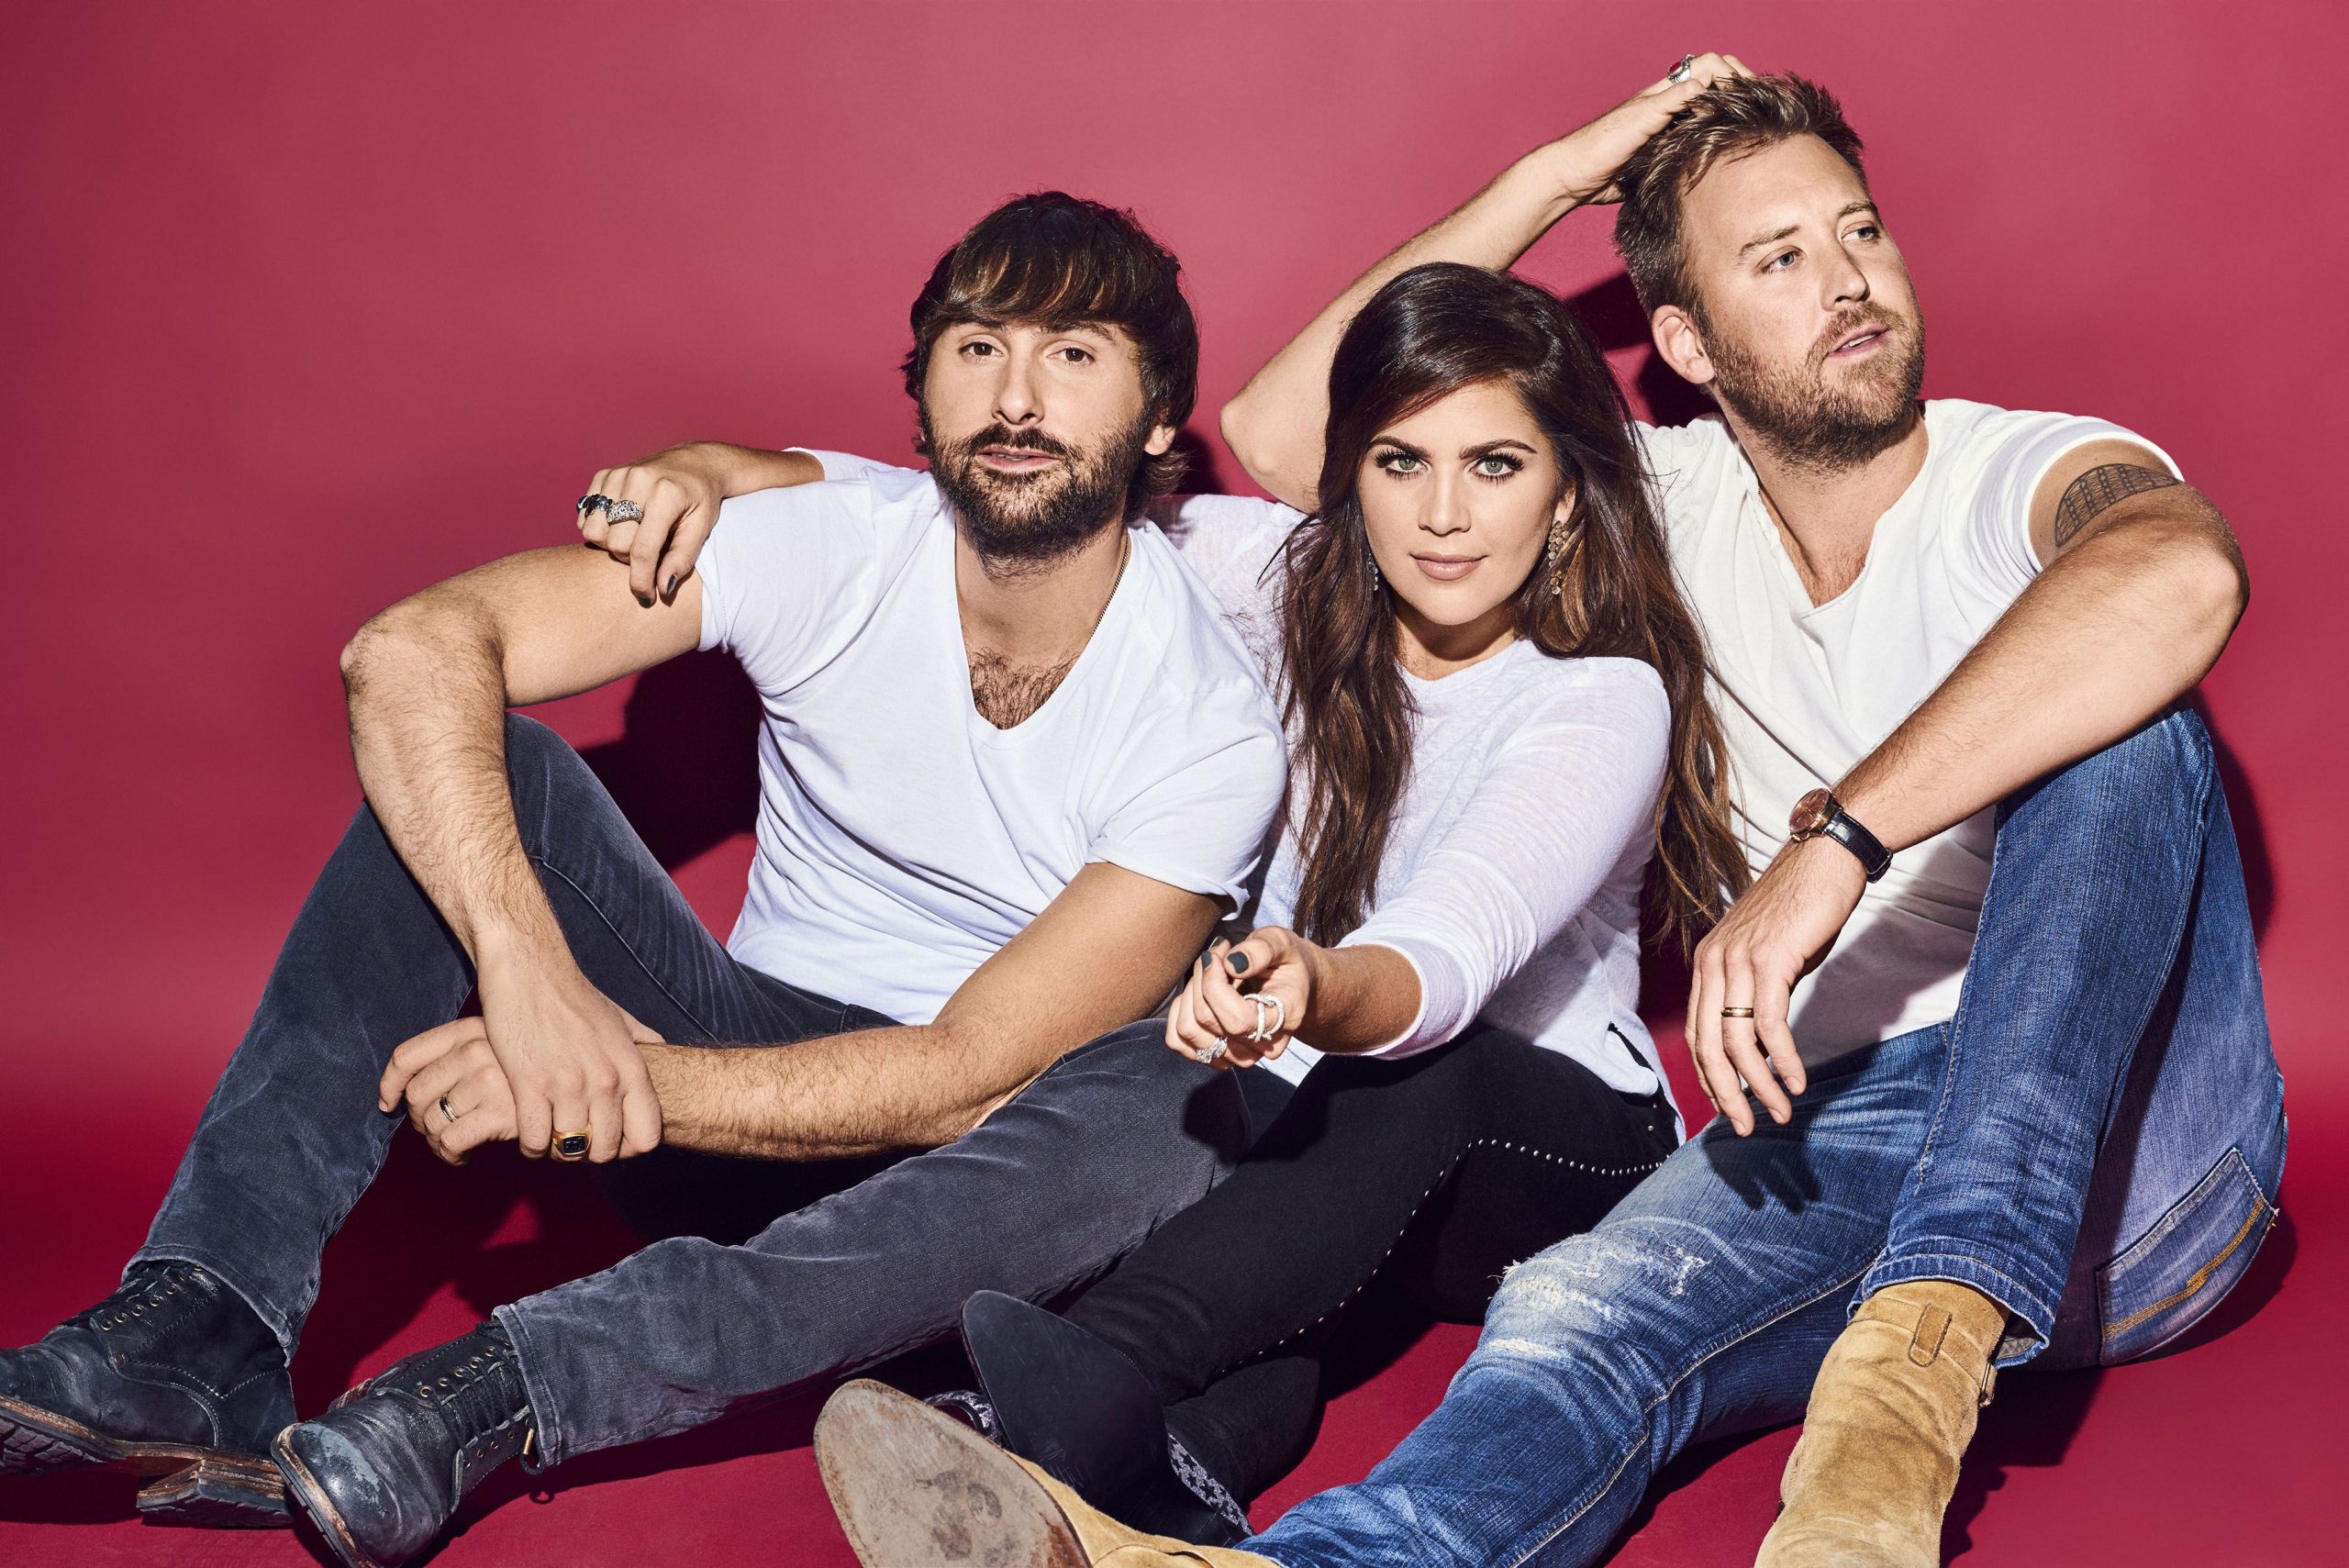 LADY ANTEBELLUM GIVES ROLLING STONE WEEKLY PREVIEW OF UPCOMING YOU LOOK GOOD WORLD TOUR